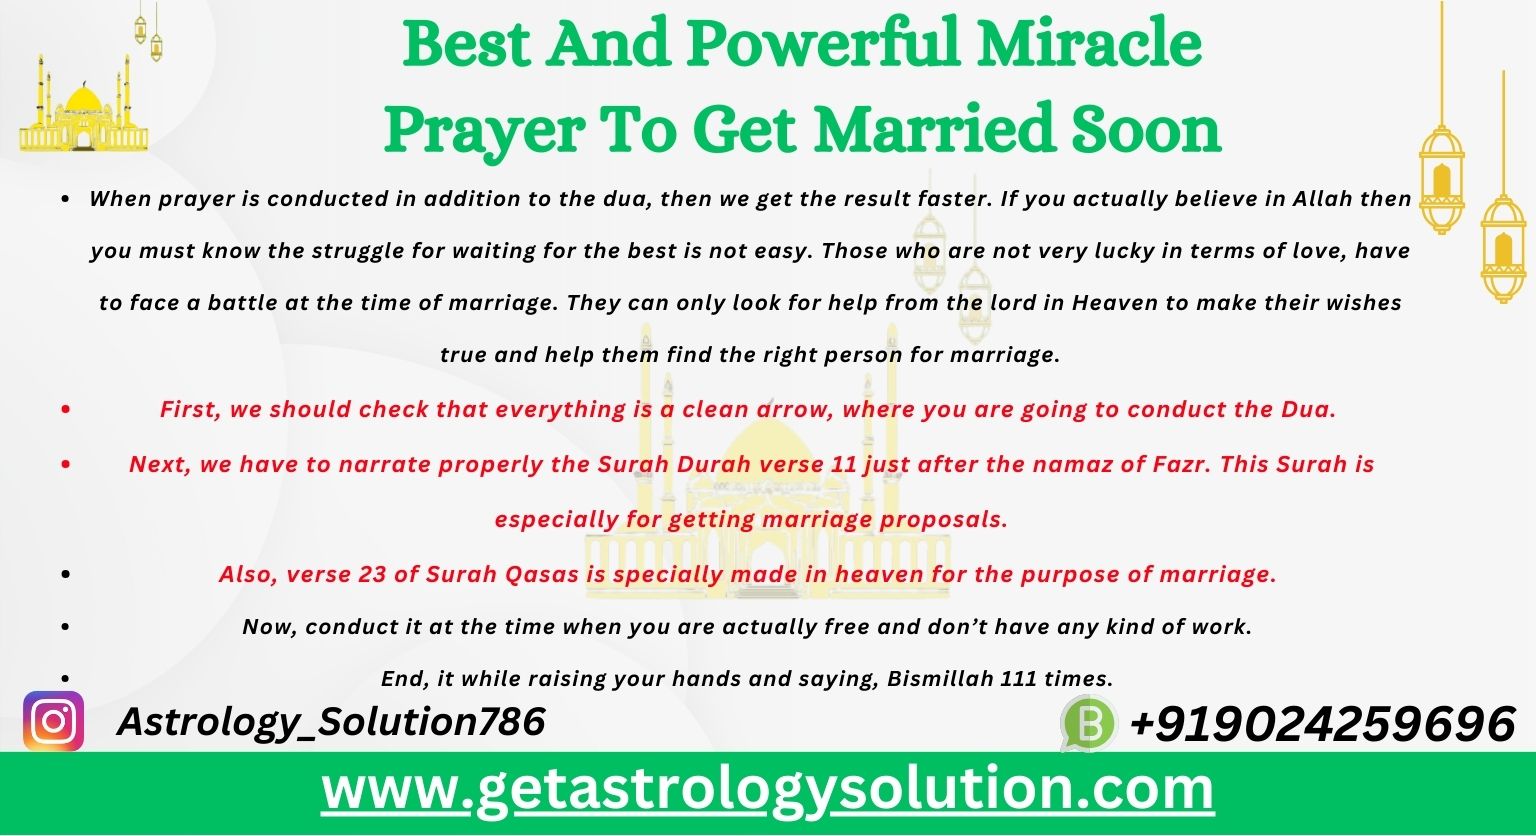 Best And Powerful Miracle Prayer To Get Married Soon